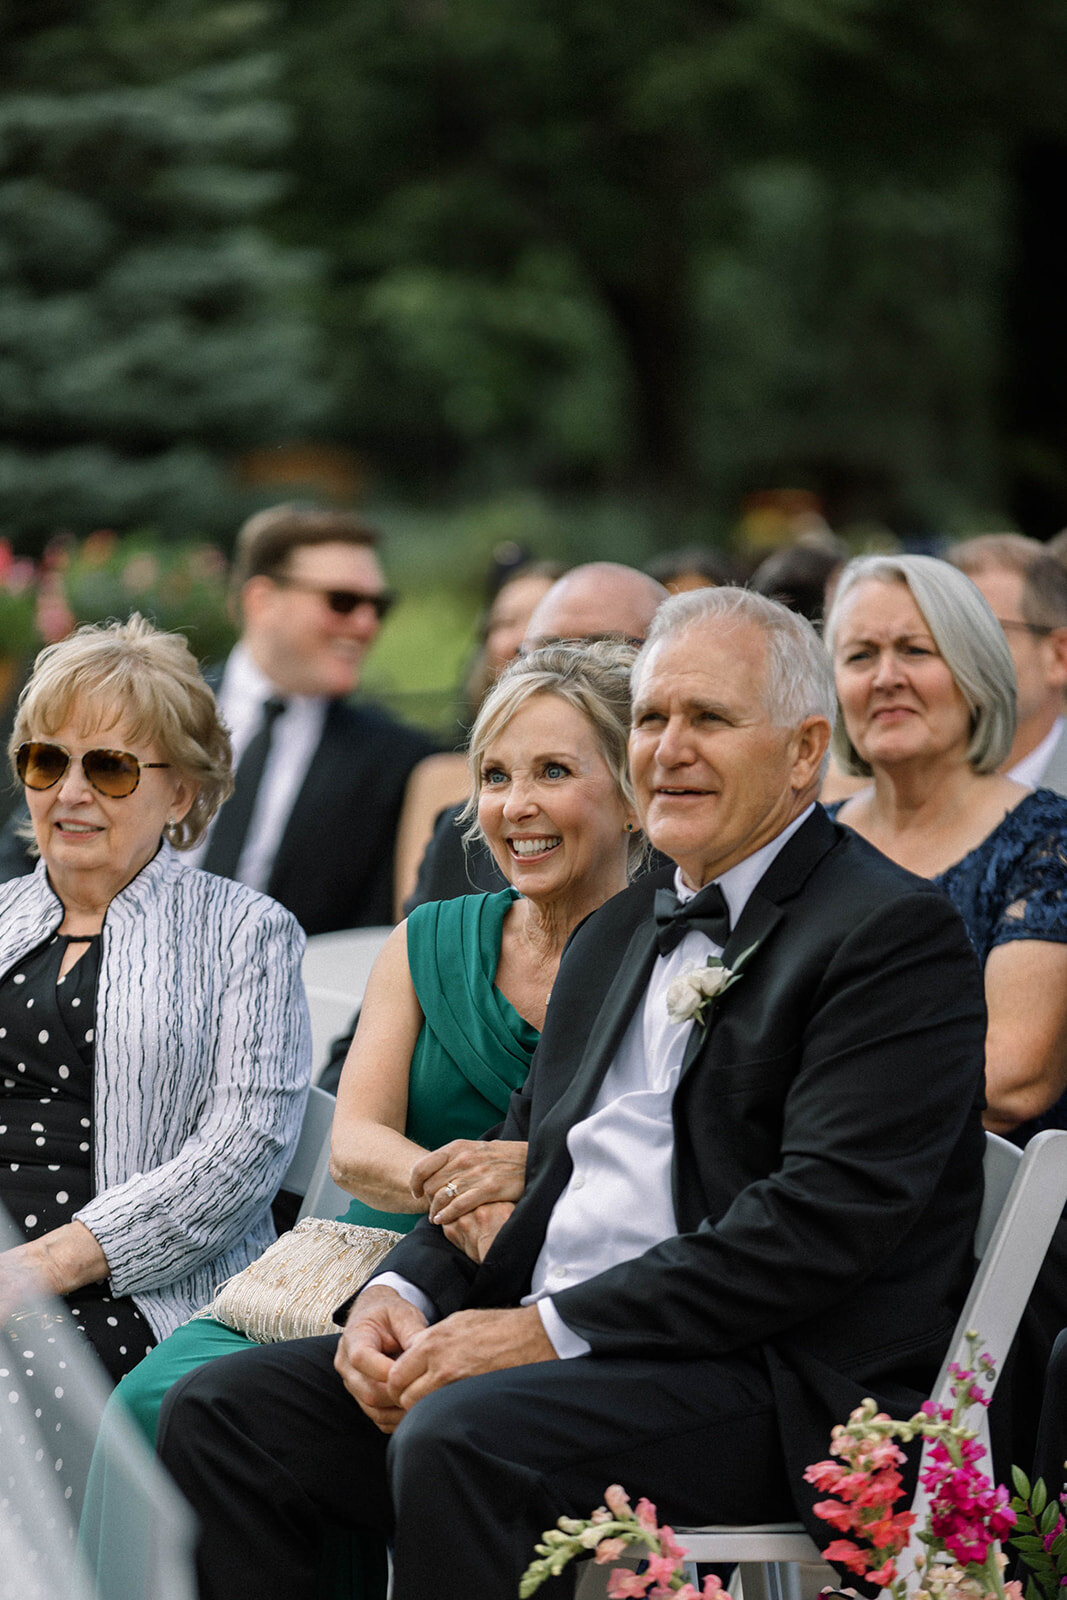 M%2bE_The_Broadmoor_Lakeside_Terrace_Wedding_Highlights_by_Diana_Coulter-52